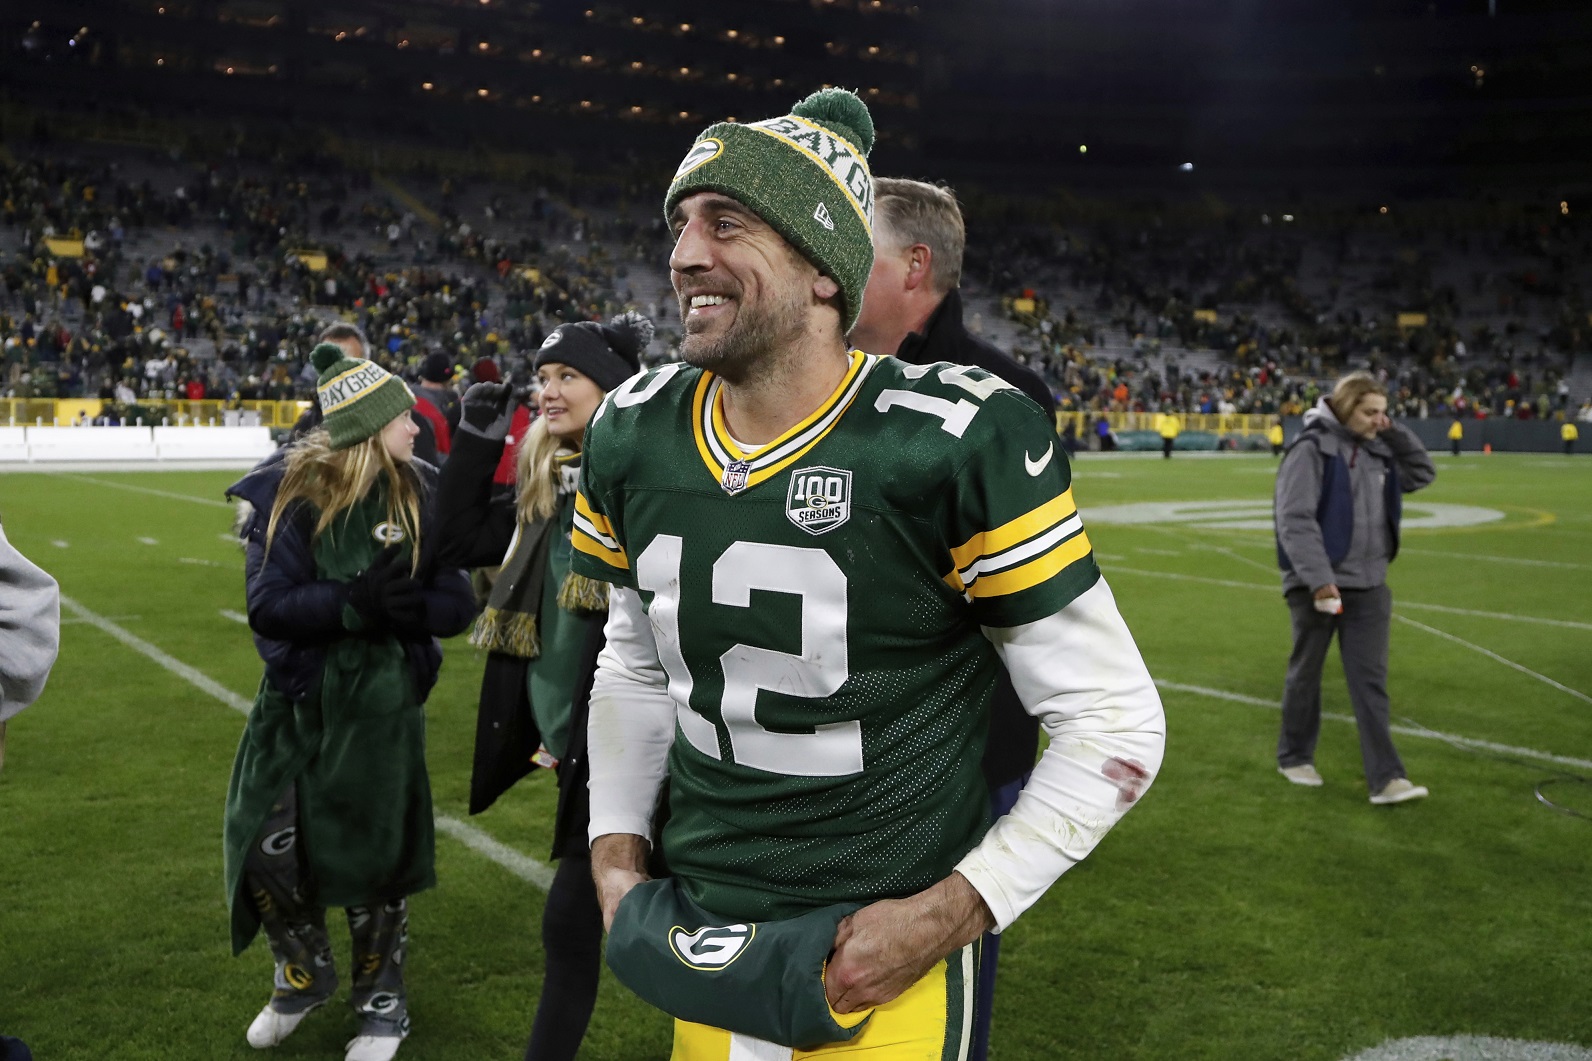 Rodgers throws for 425 yards; Crosby hits FG as time expires